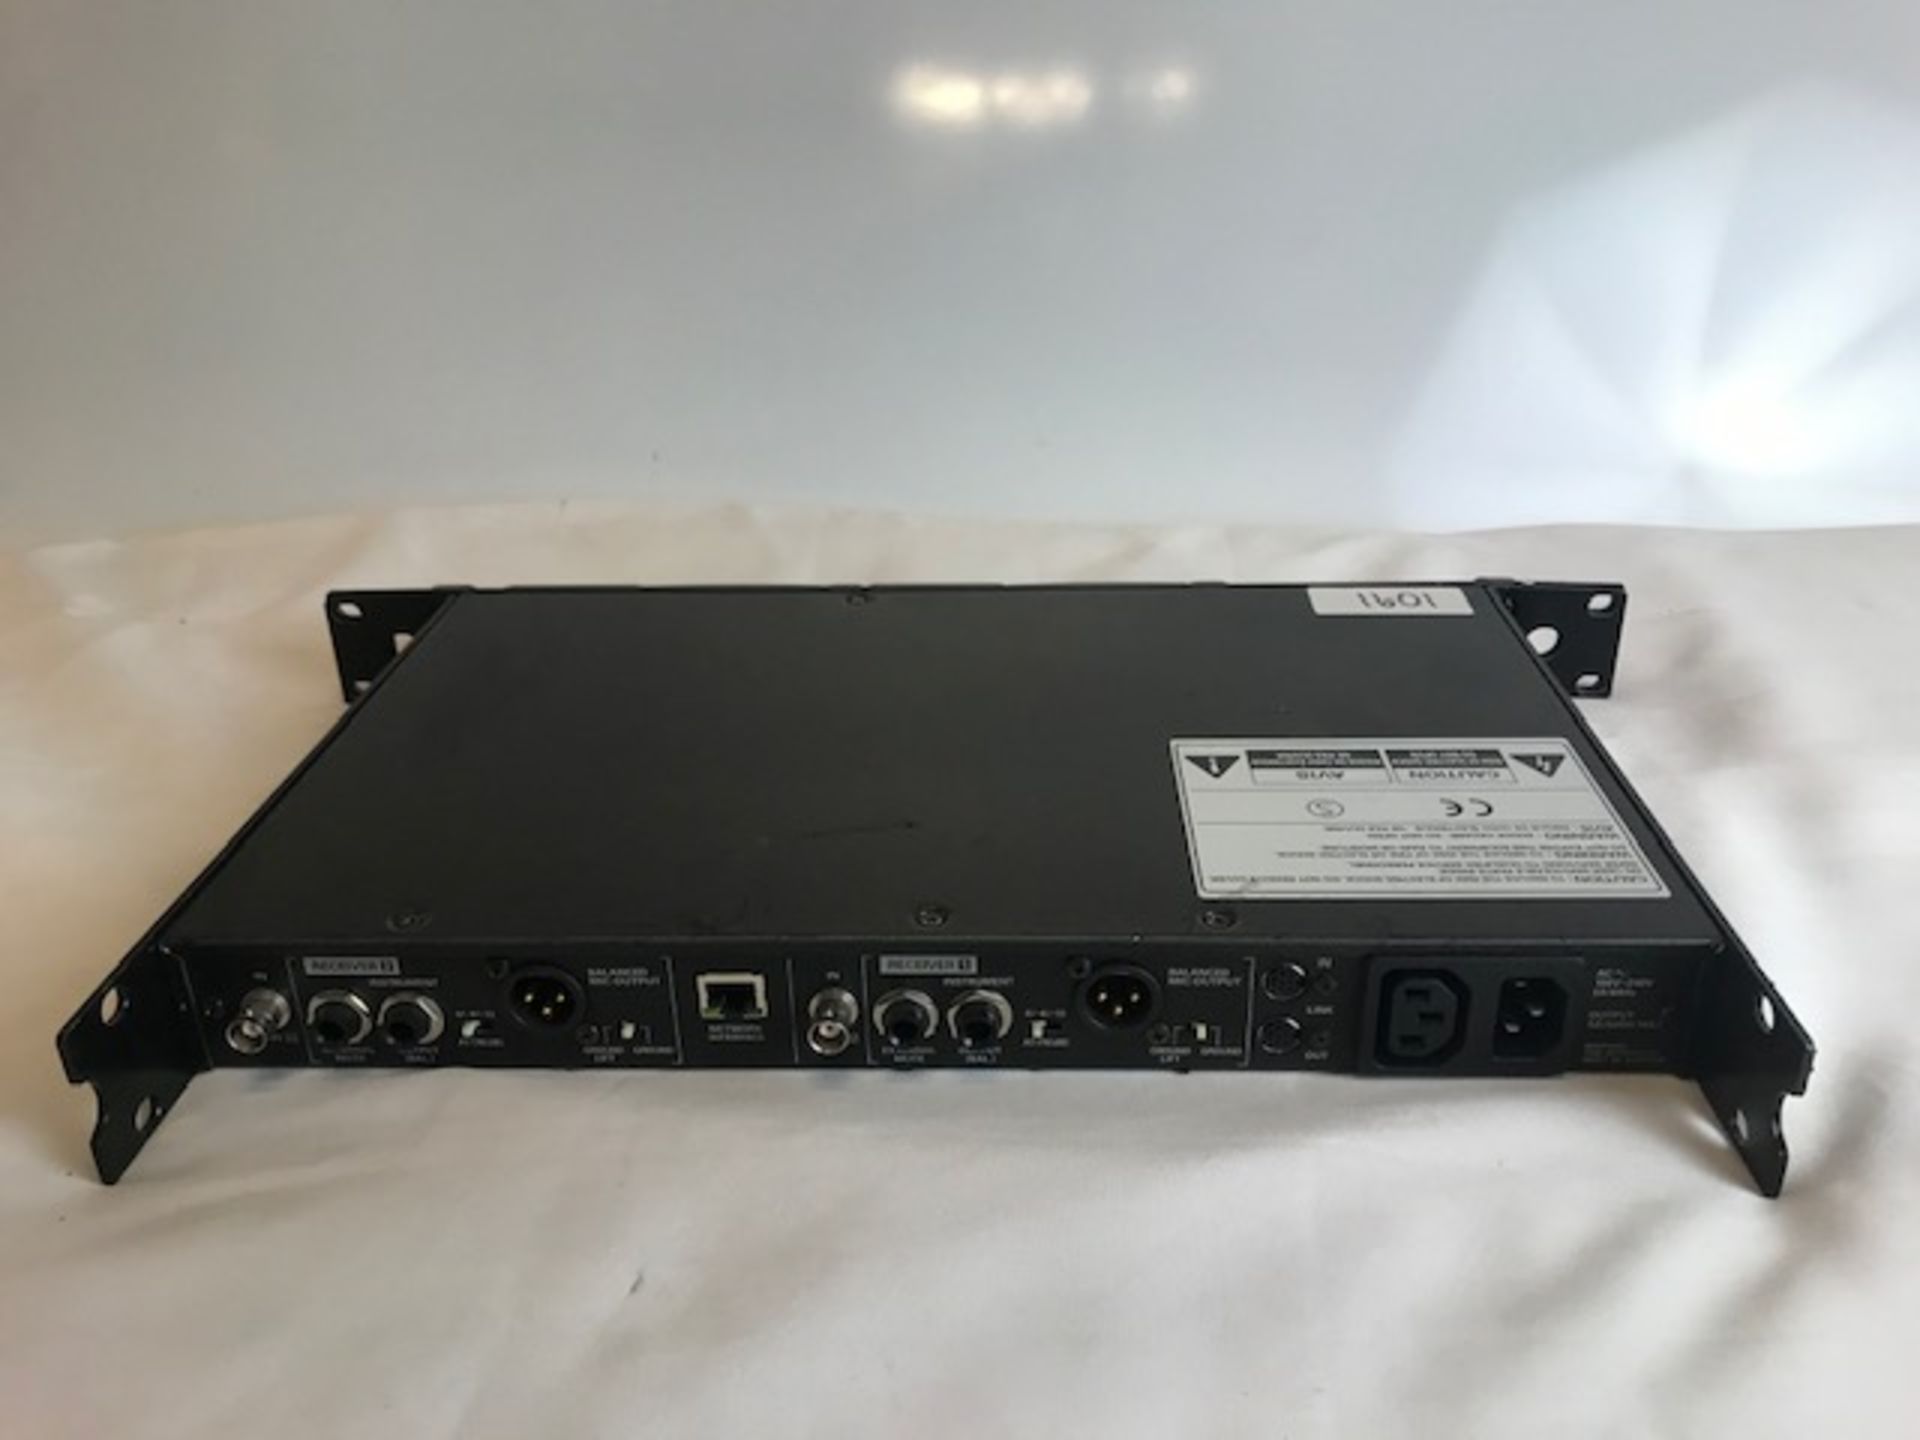 1 x AudioTechnica AEW-R5200 dual receiver set up (no mics) - Ref: 1091 - CL581 - Location: - Image 2 of 3